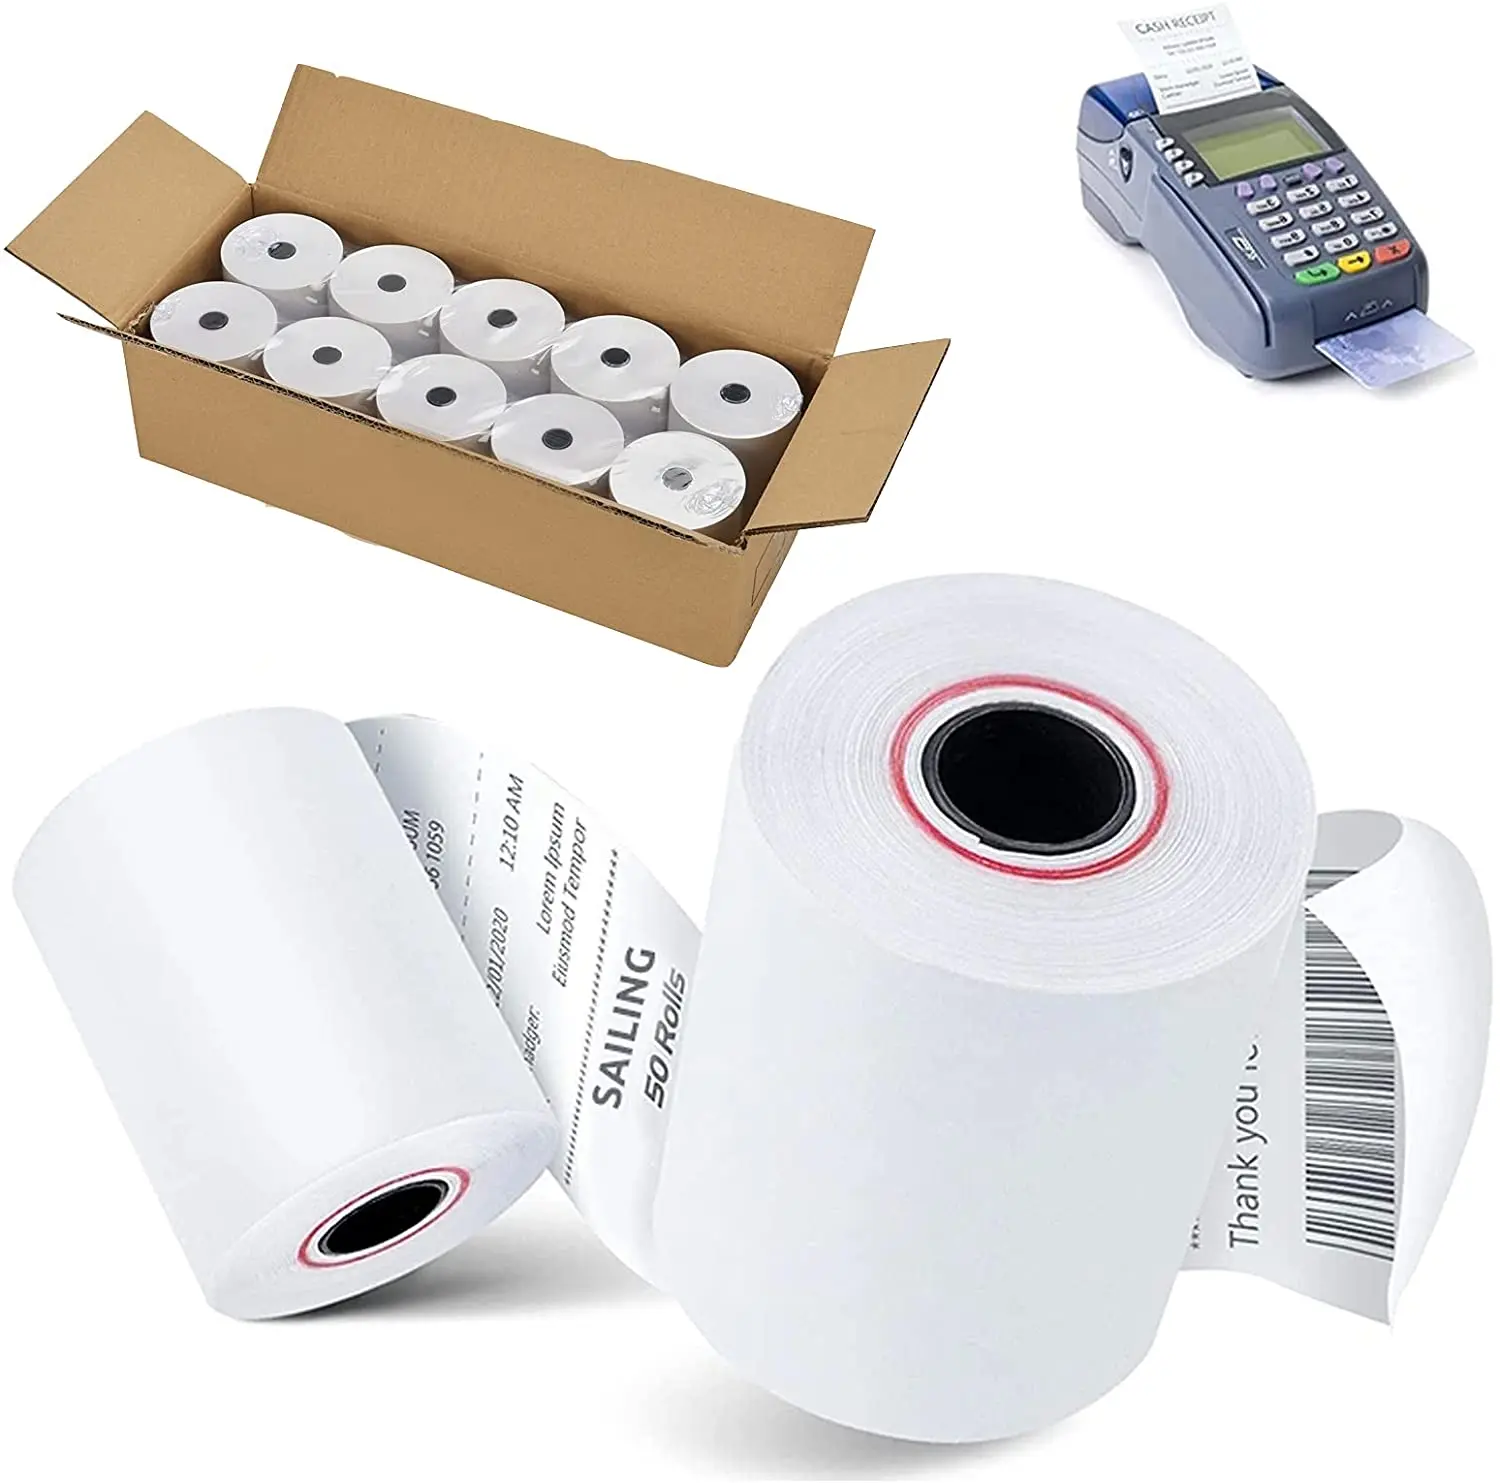 57x40mm Thermal Receipt Paper Roll For Mobile POS 58mm Thermal PrinterBDAU 